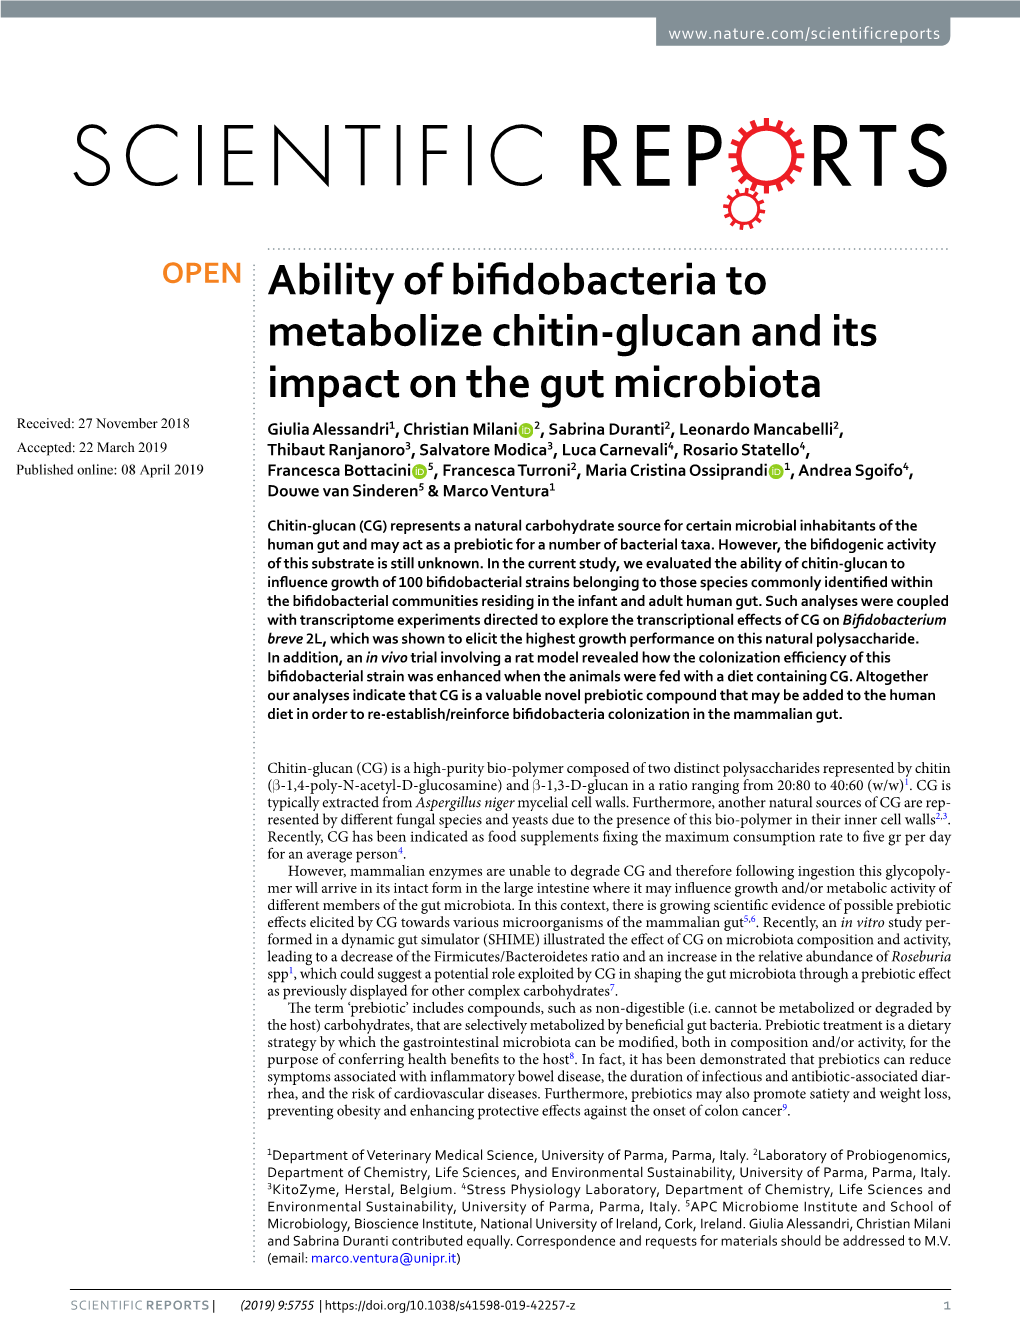 Ability of Bifidobacteria to Metabolize Chitin-Glucan and Its Impact on The